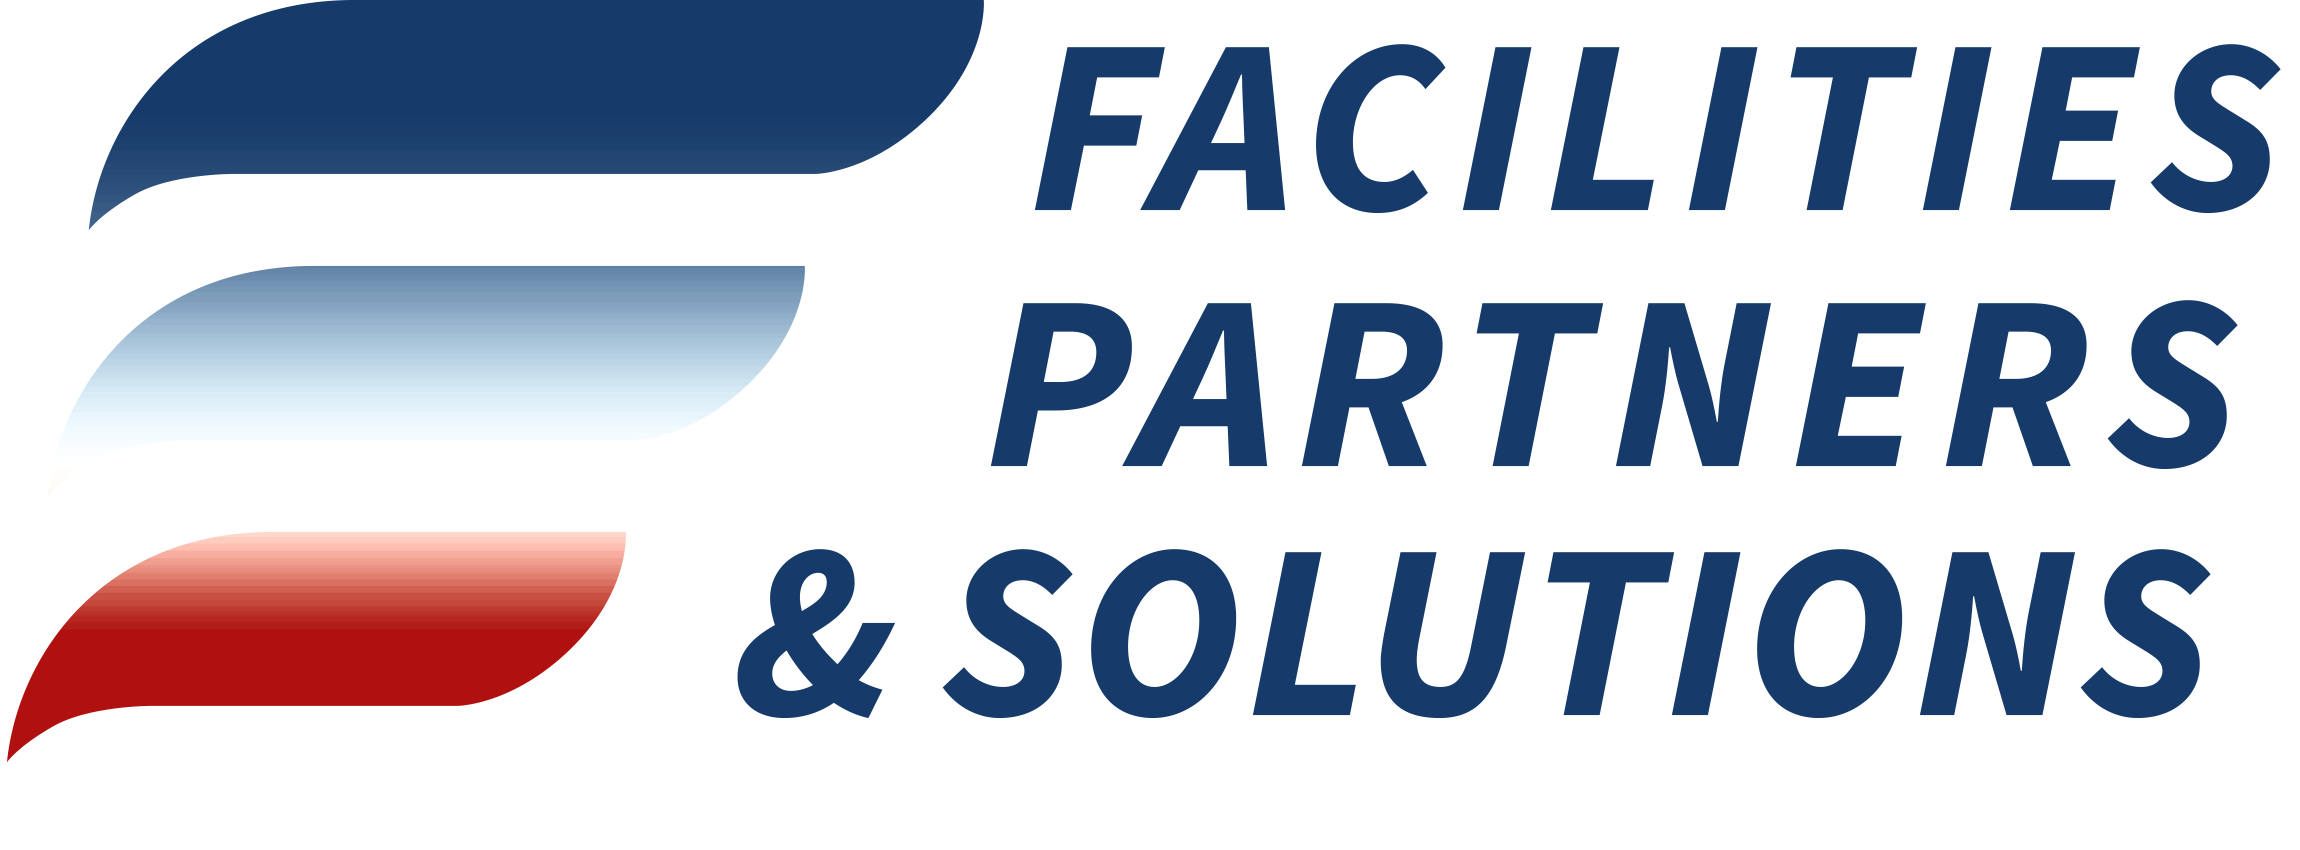 Facilities Partners & Solutions